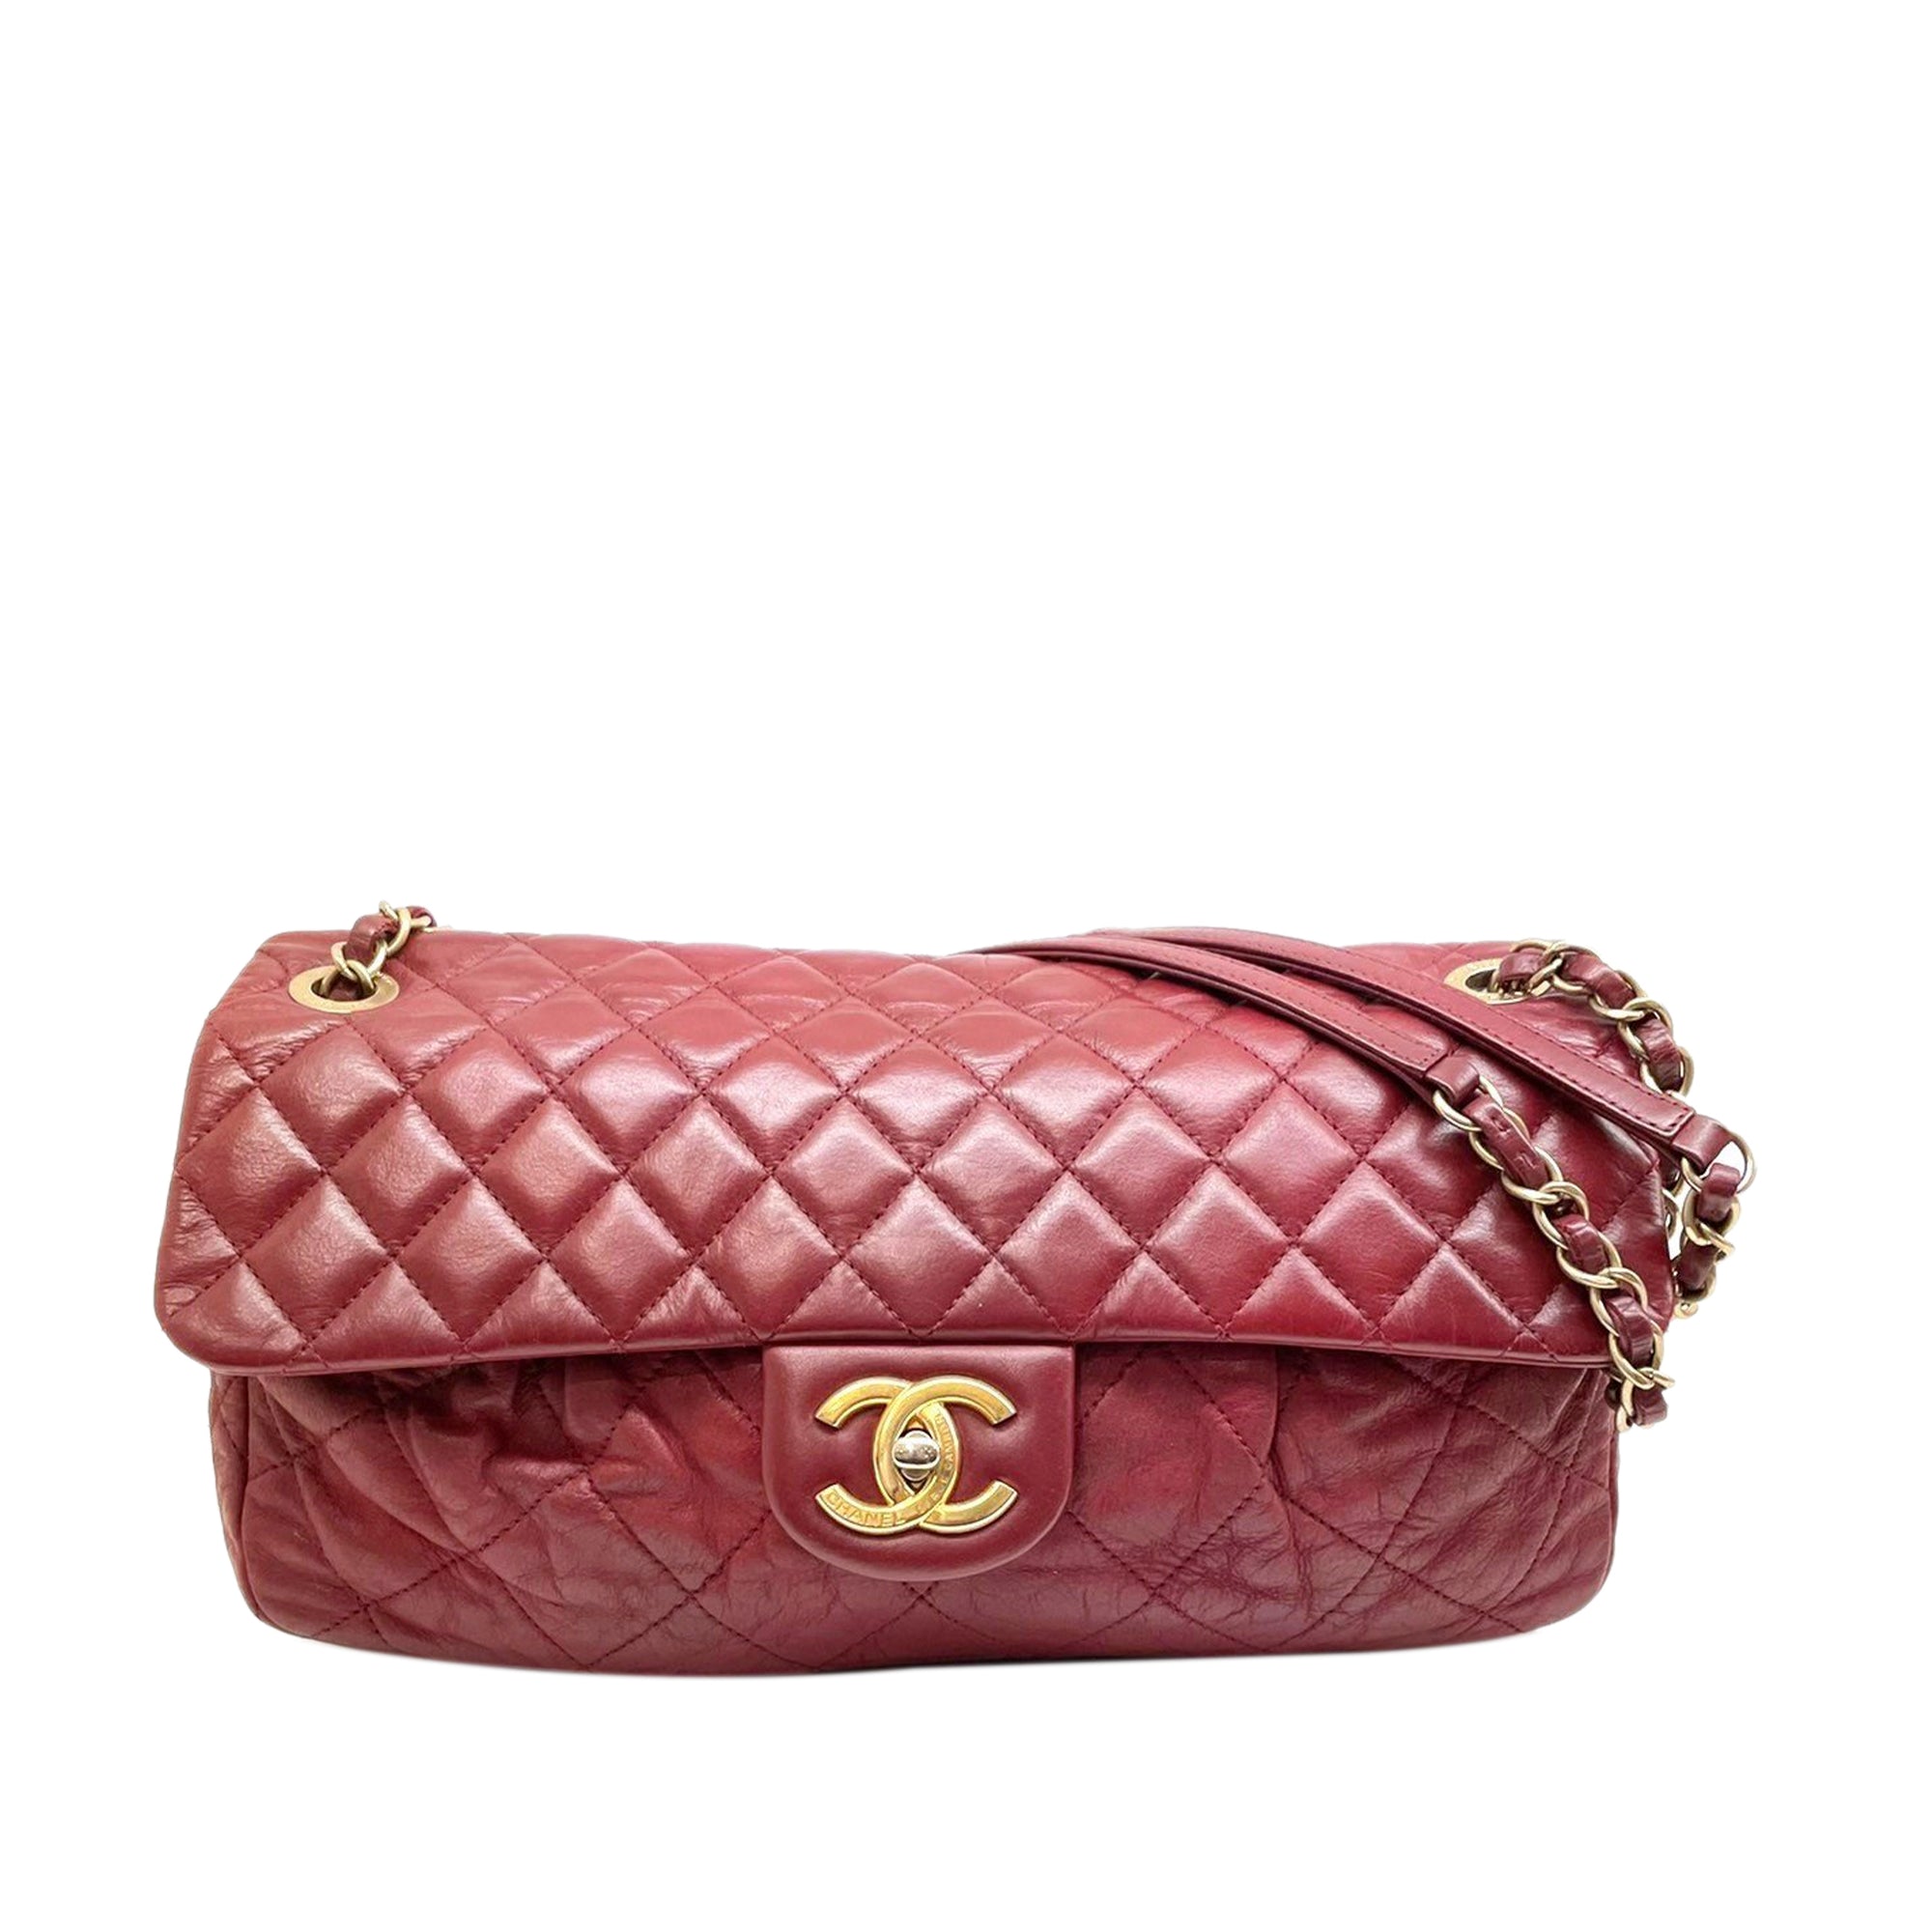 Chanel Red Quilted Crinkled Calfskin Caviar Leather CC Flap Bag